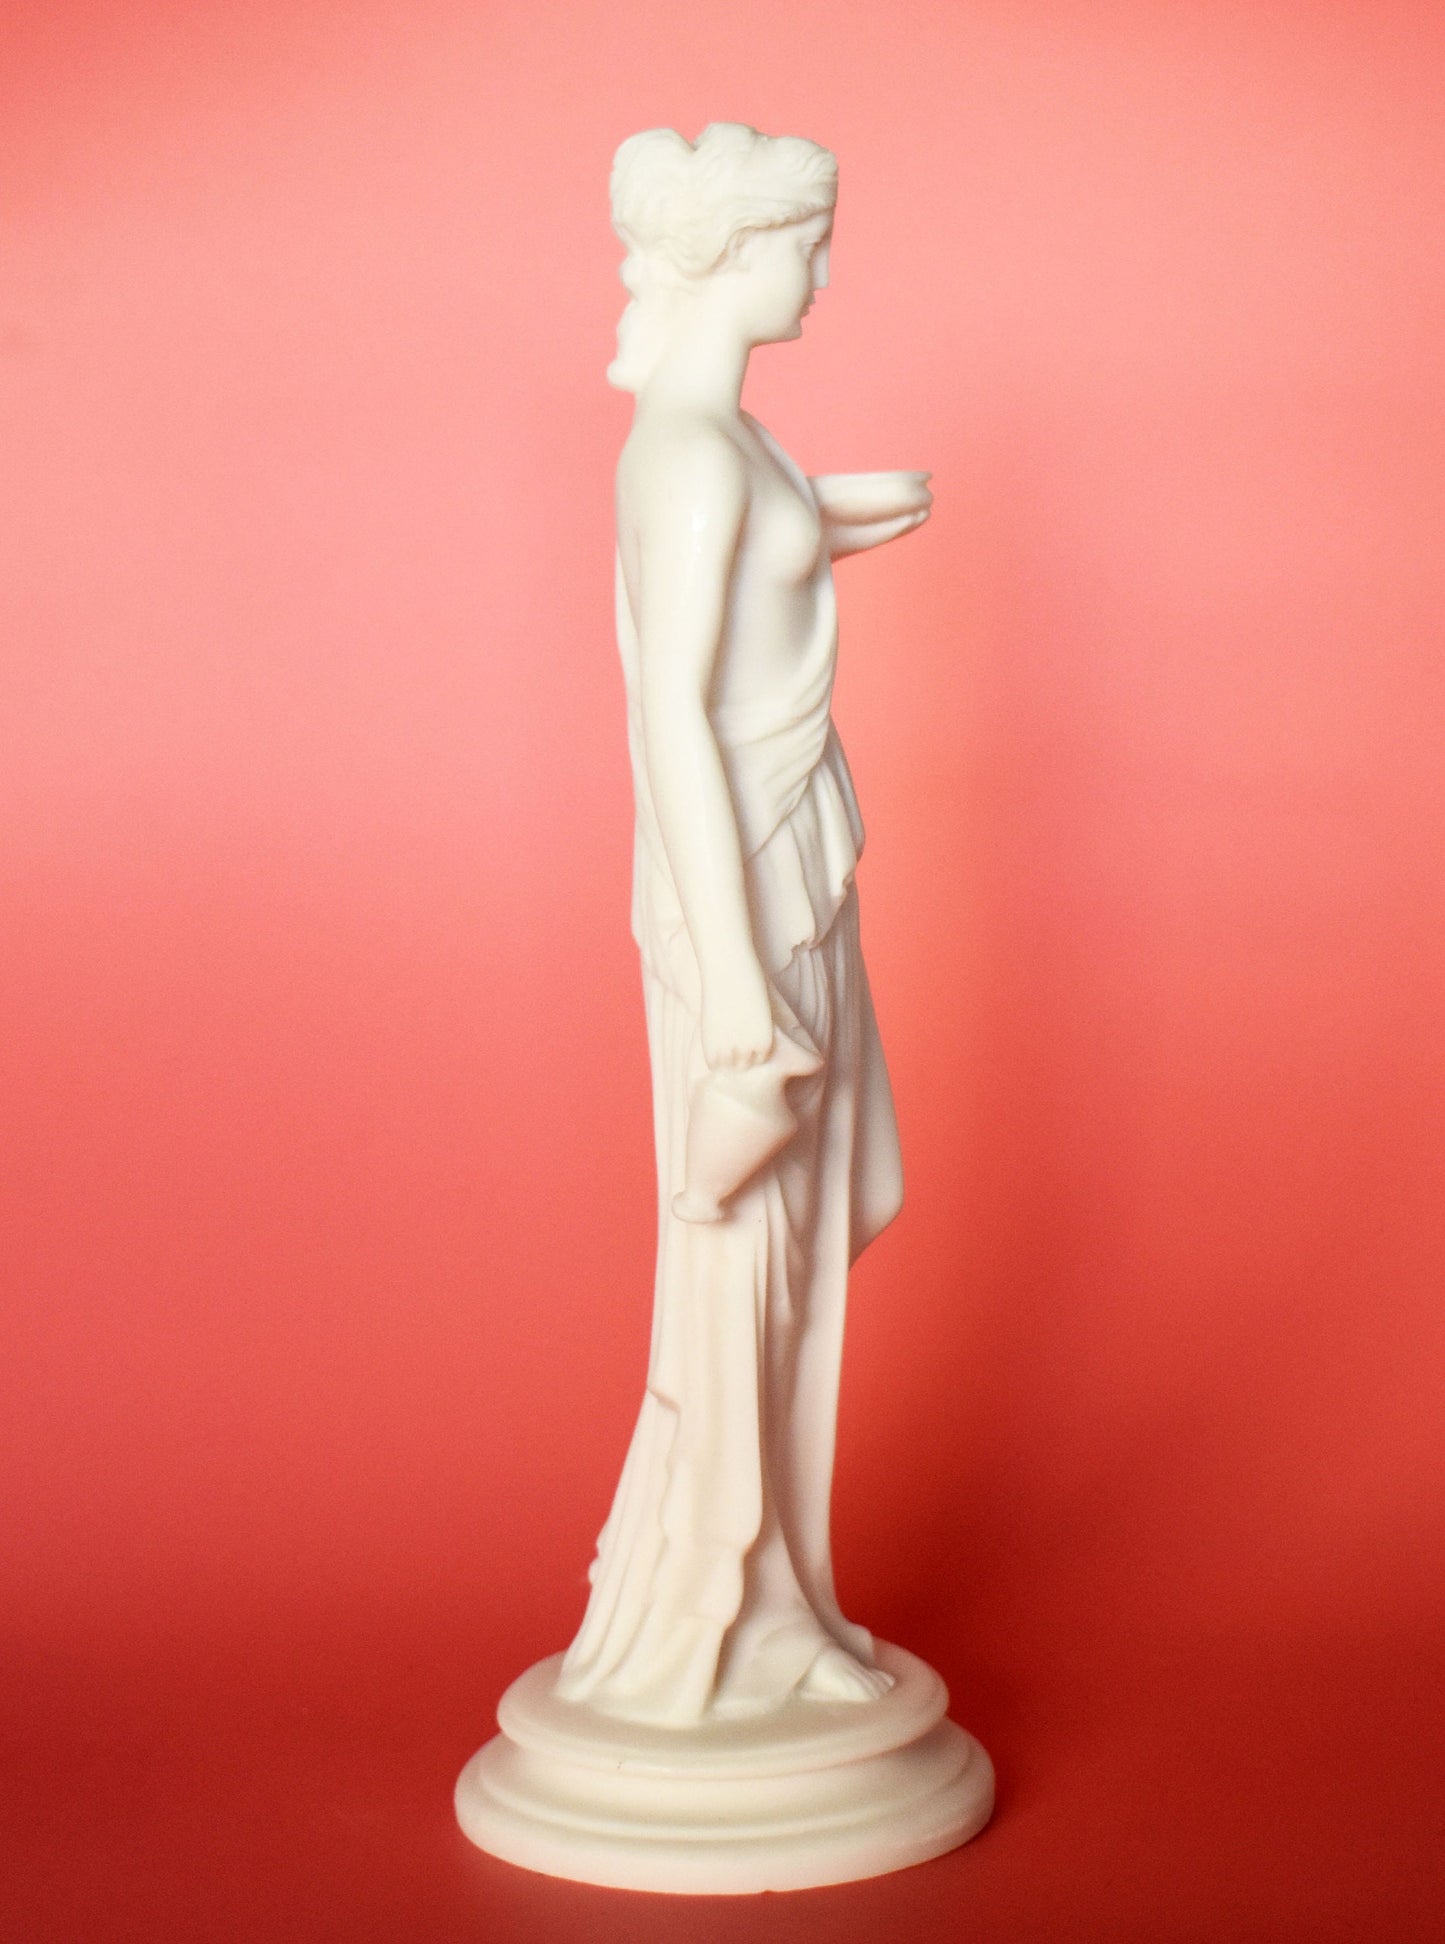 Hebe Juventas - Greek Roman Goddess of Youth or the Prime of Life - Cupbearer of the Gods - Nectar and Ambrosia -  Alabaster Statue